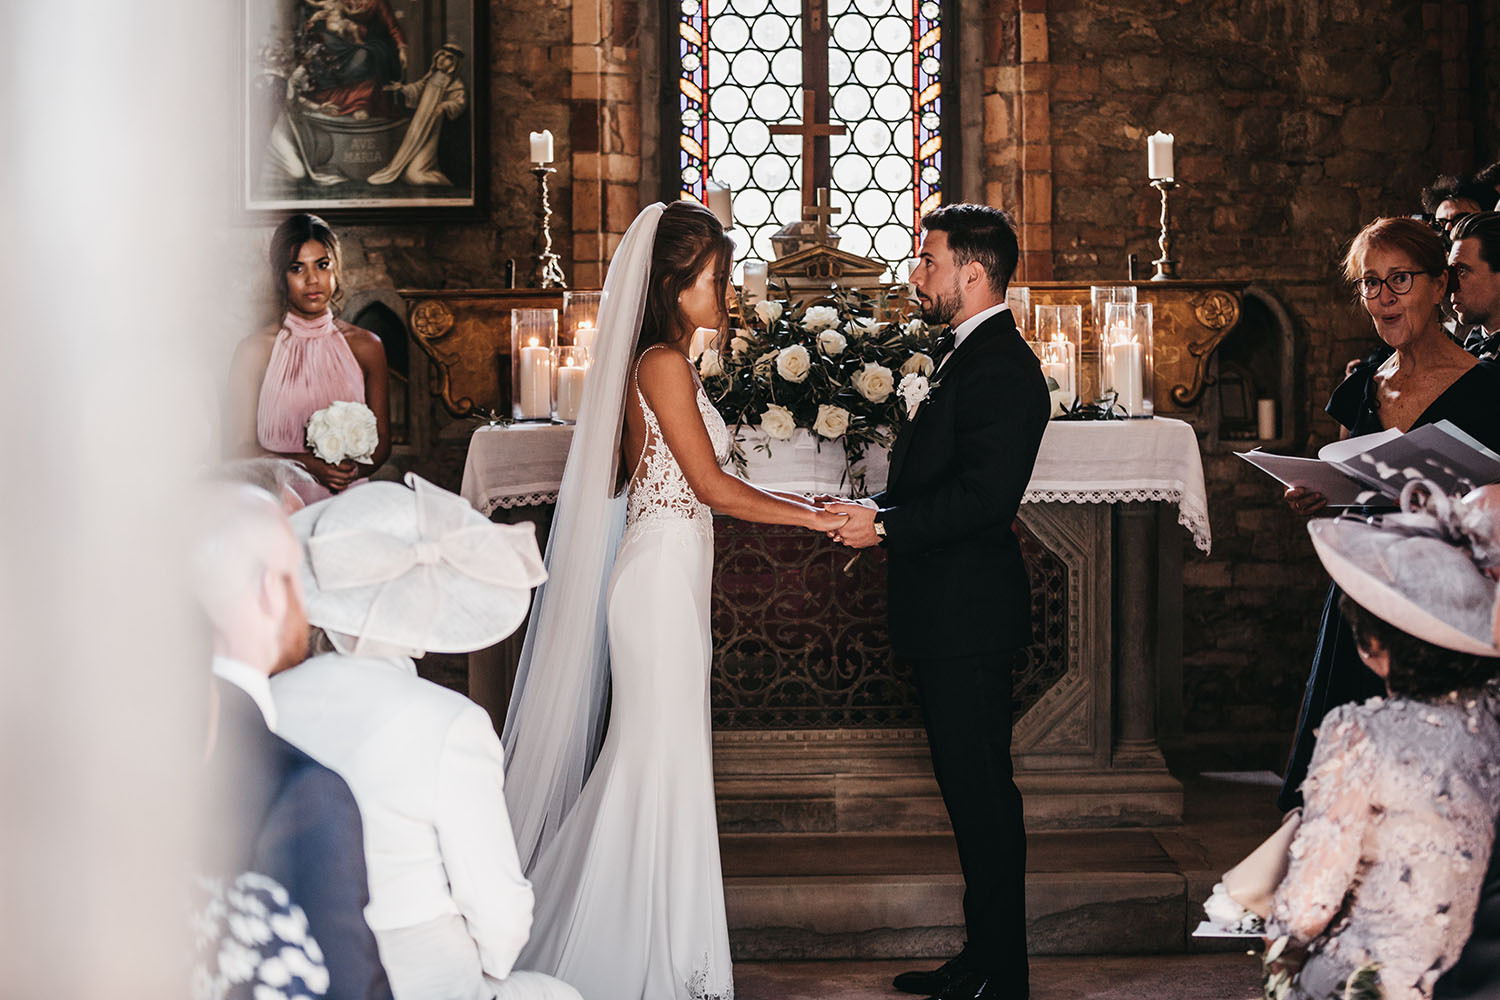 The ceremony took place in a beautiful old chapel of the venue